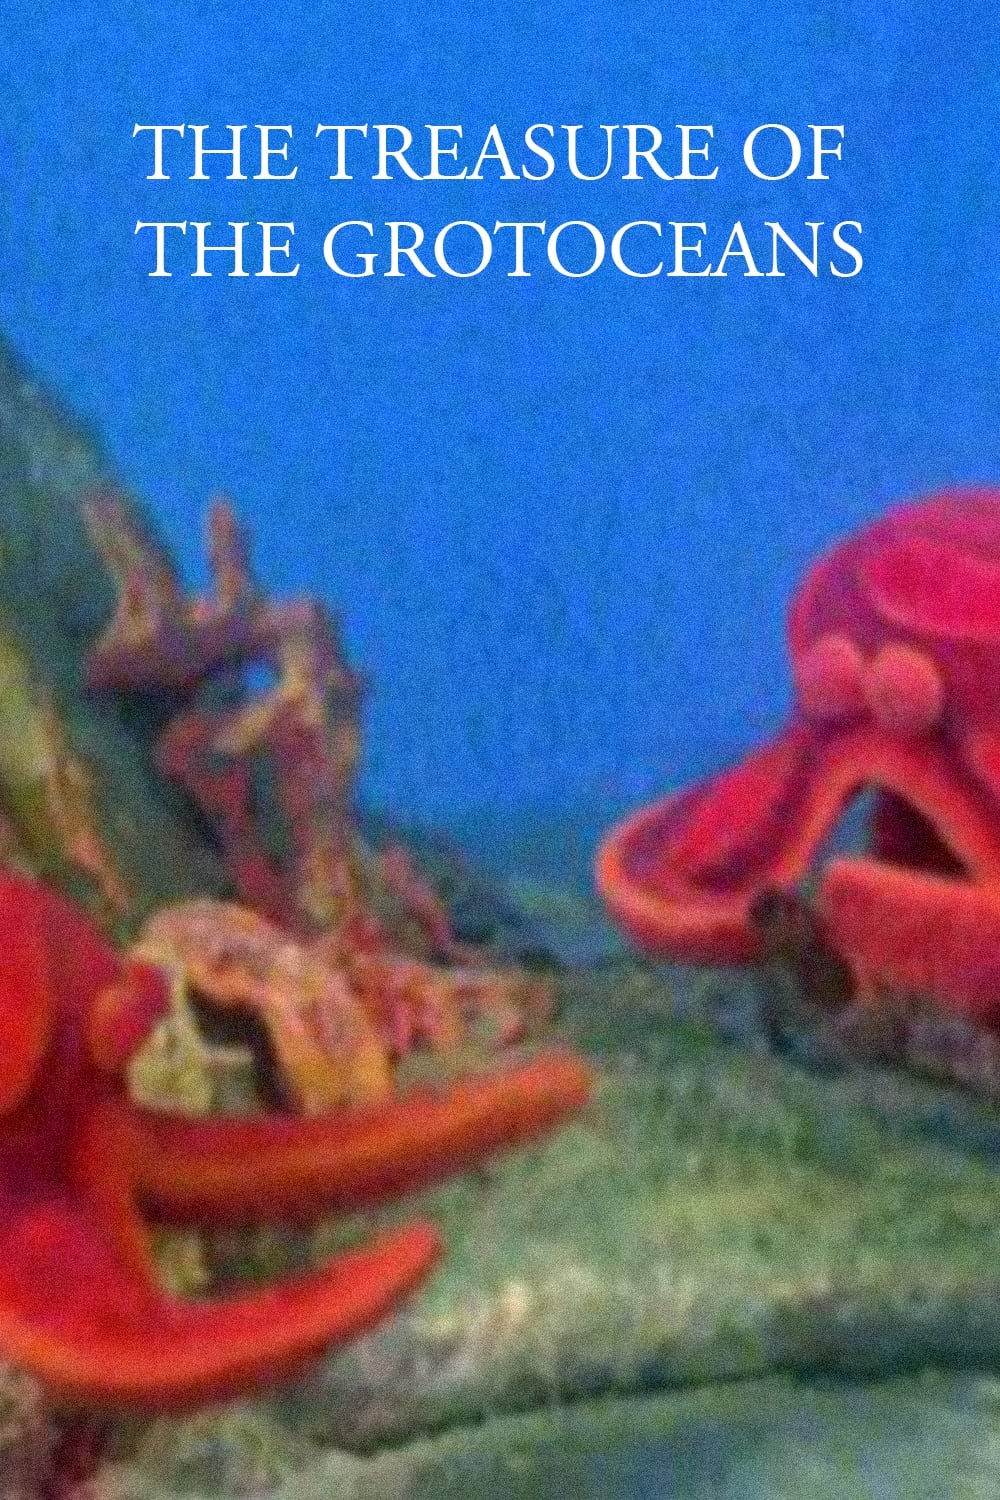 The Treasure of the Grotoceans